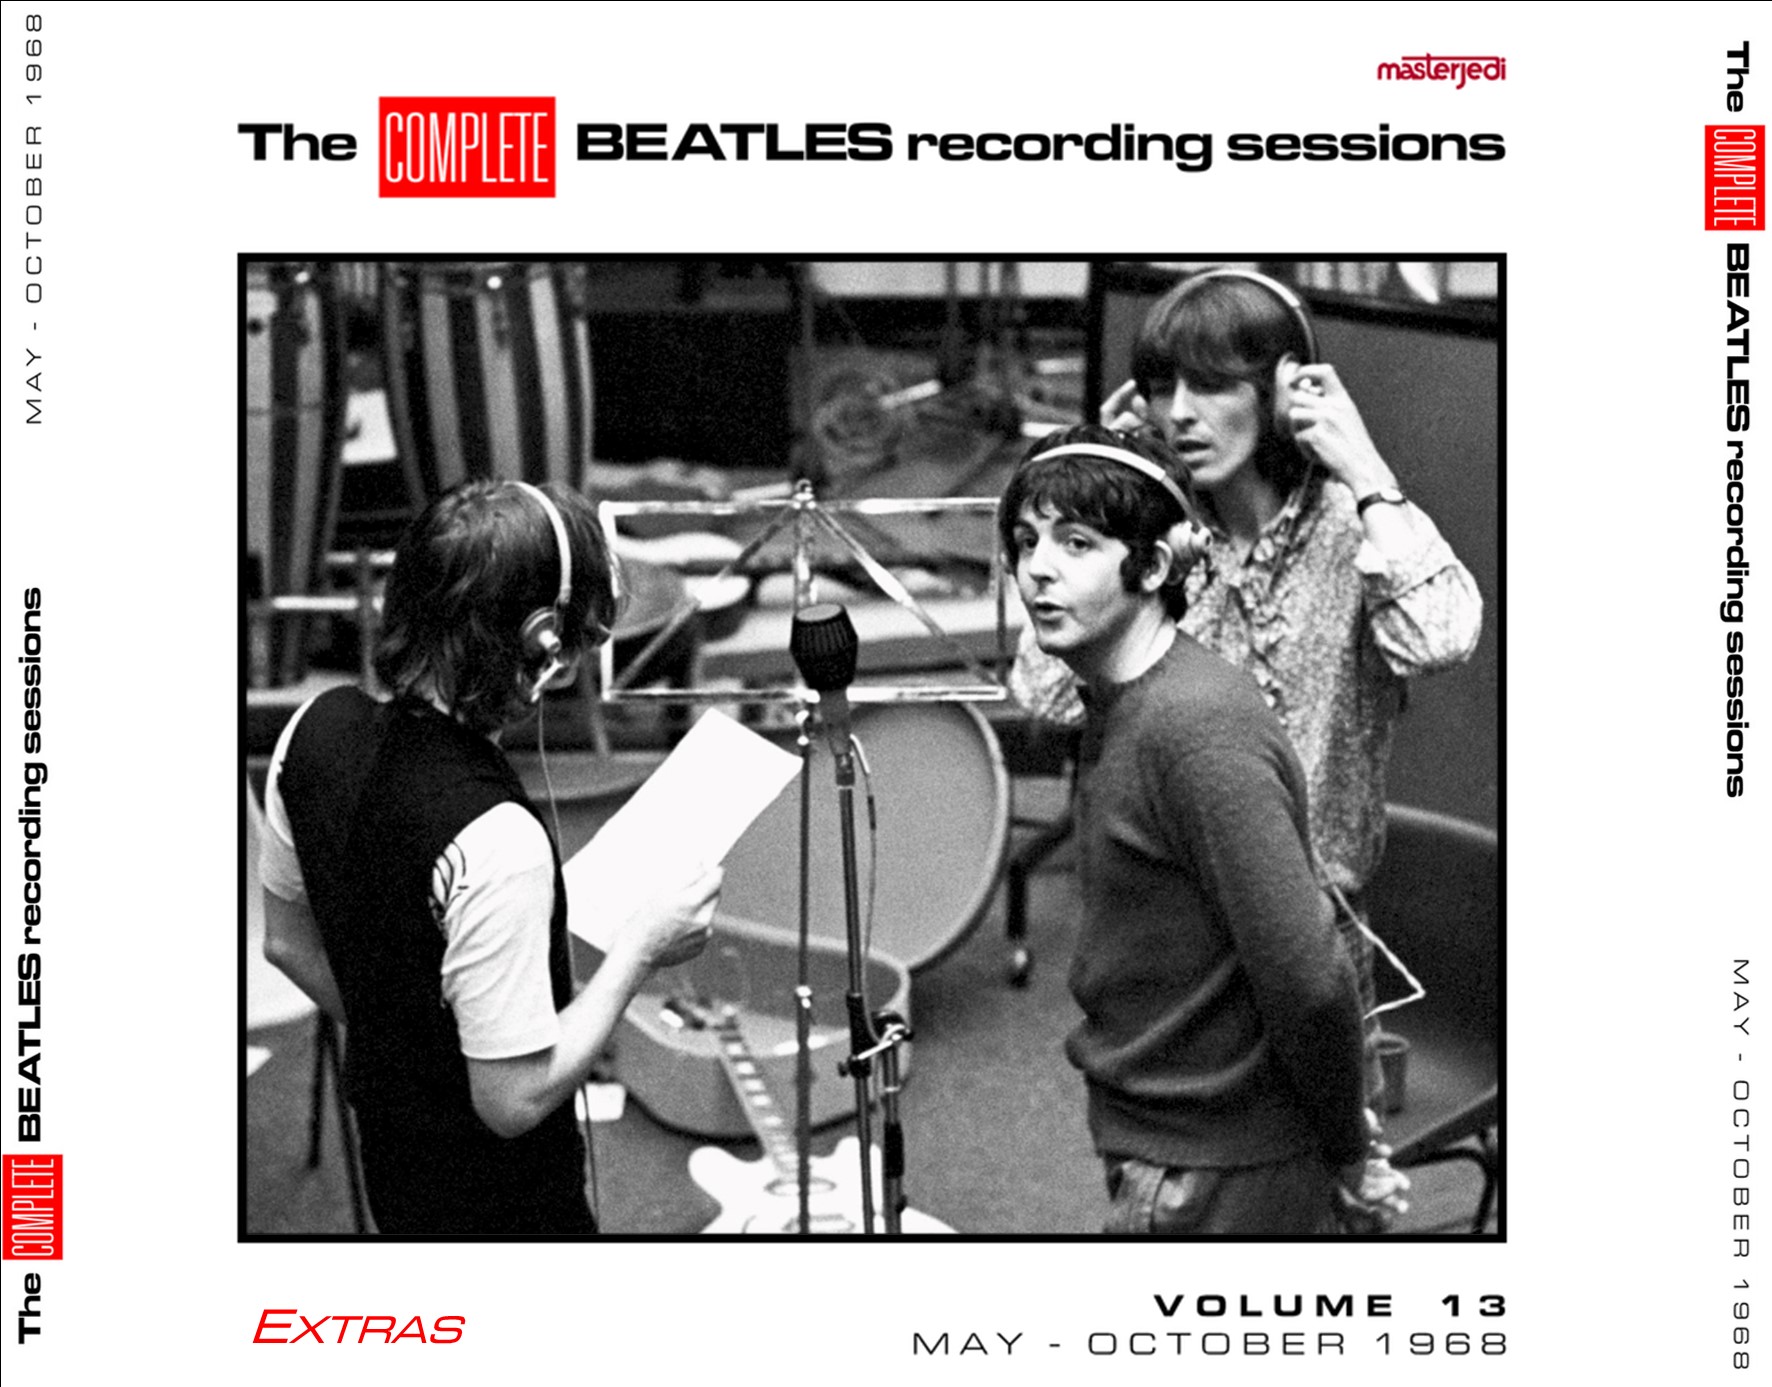 Recording sessions Vol13 Extras Front.jpg